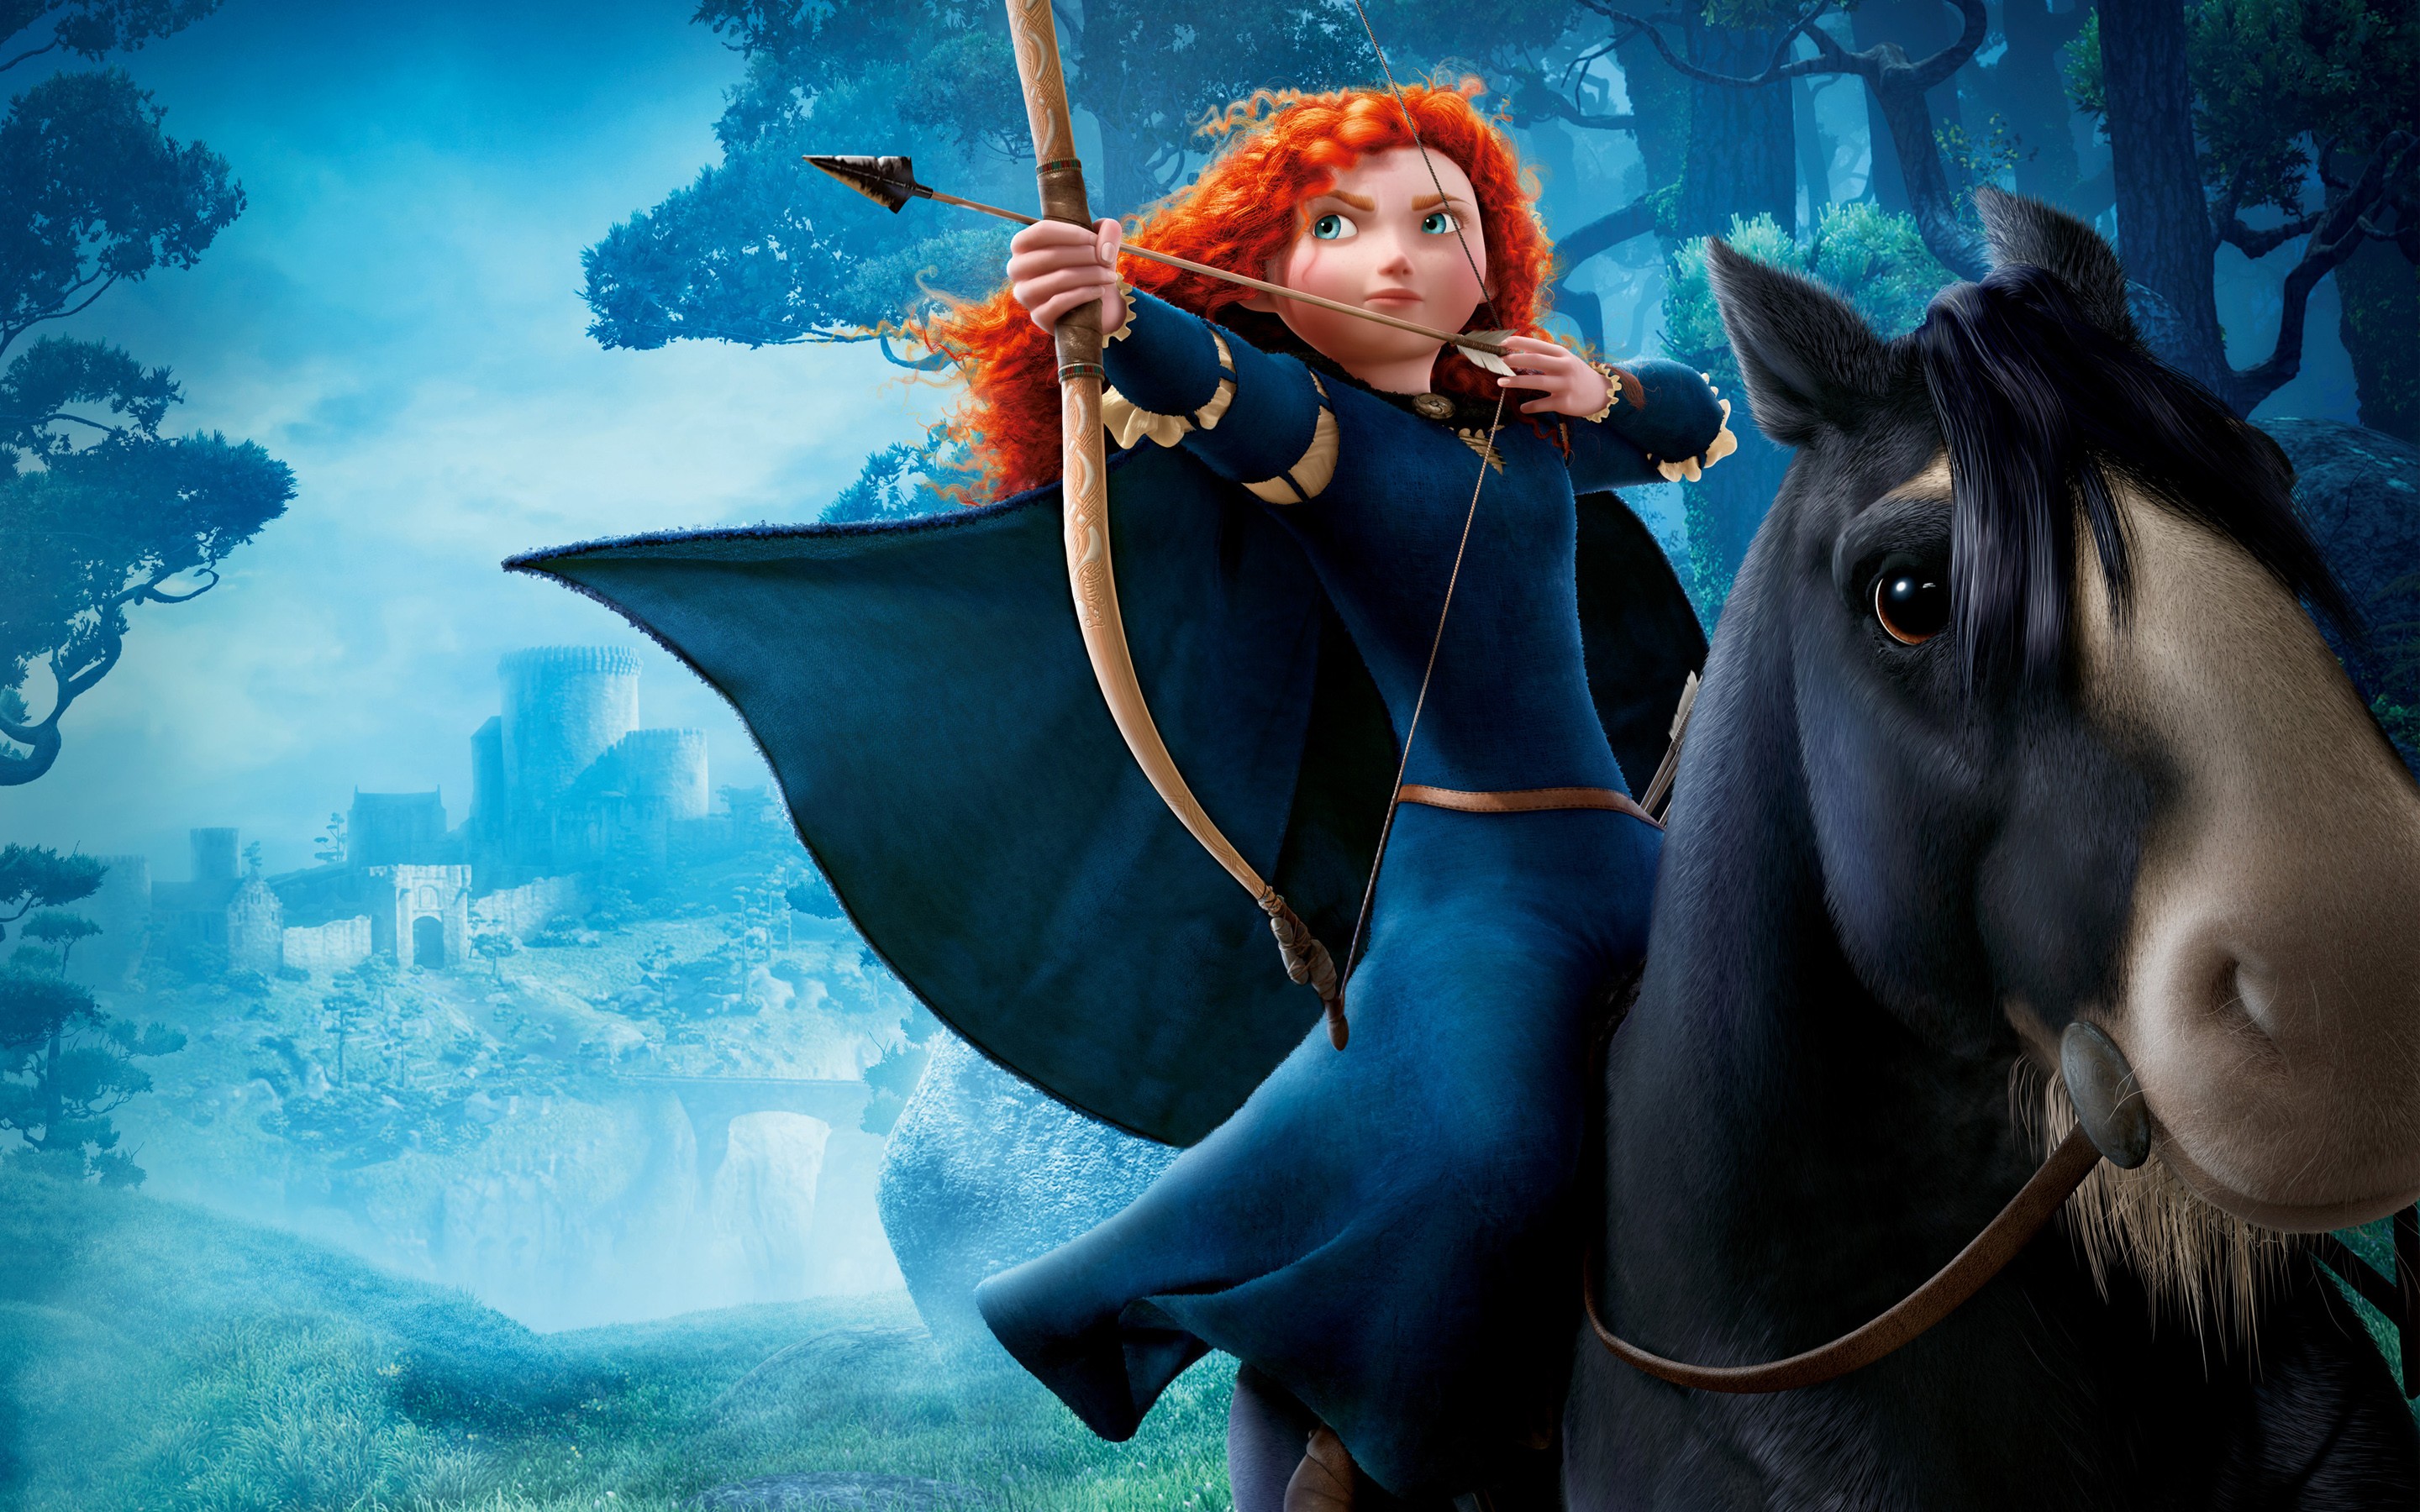 Princess Merida 1280x1024 Resolution HD 4k Wallpaper, Image, Background, Photo and Picture